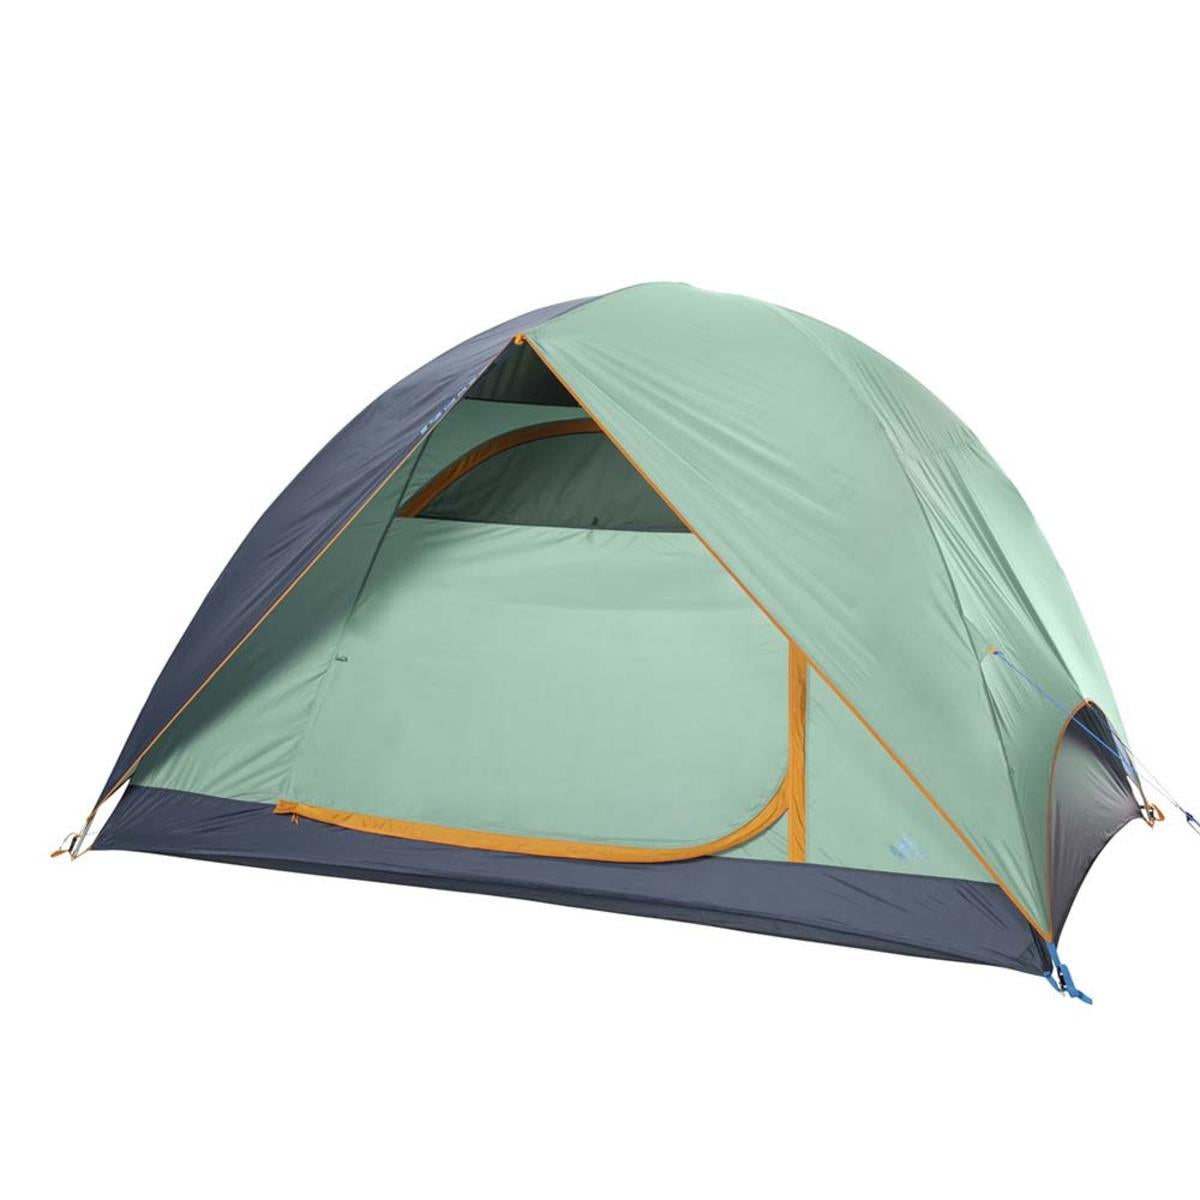 Kelty Tallboy 6 Person Tent